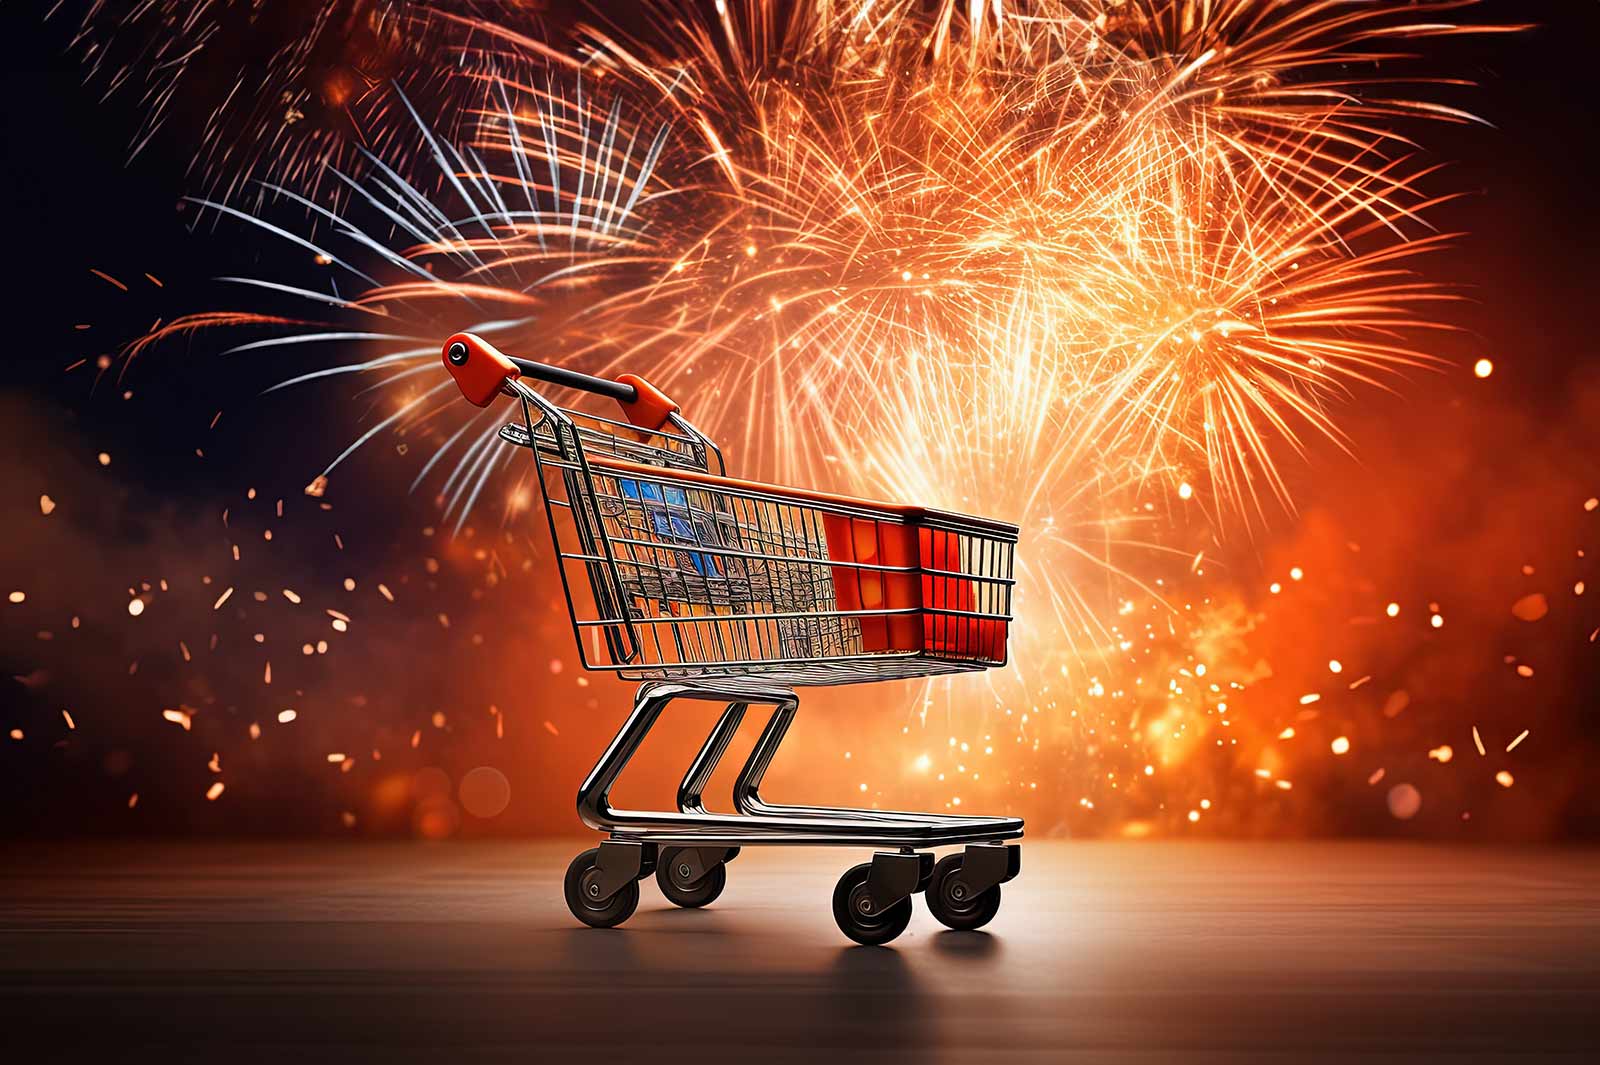 Shopping cart in front of a fireworks display